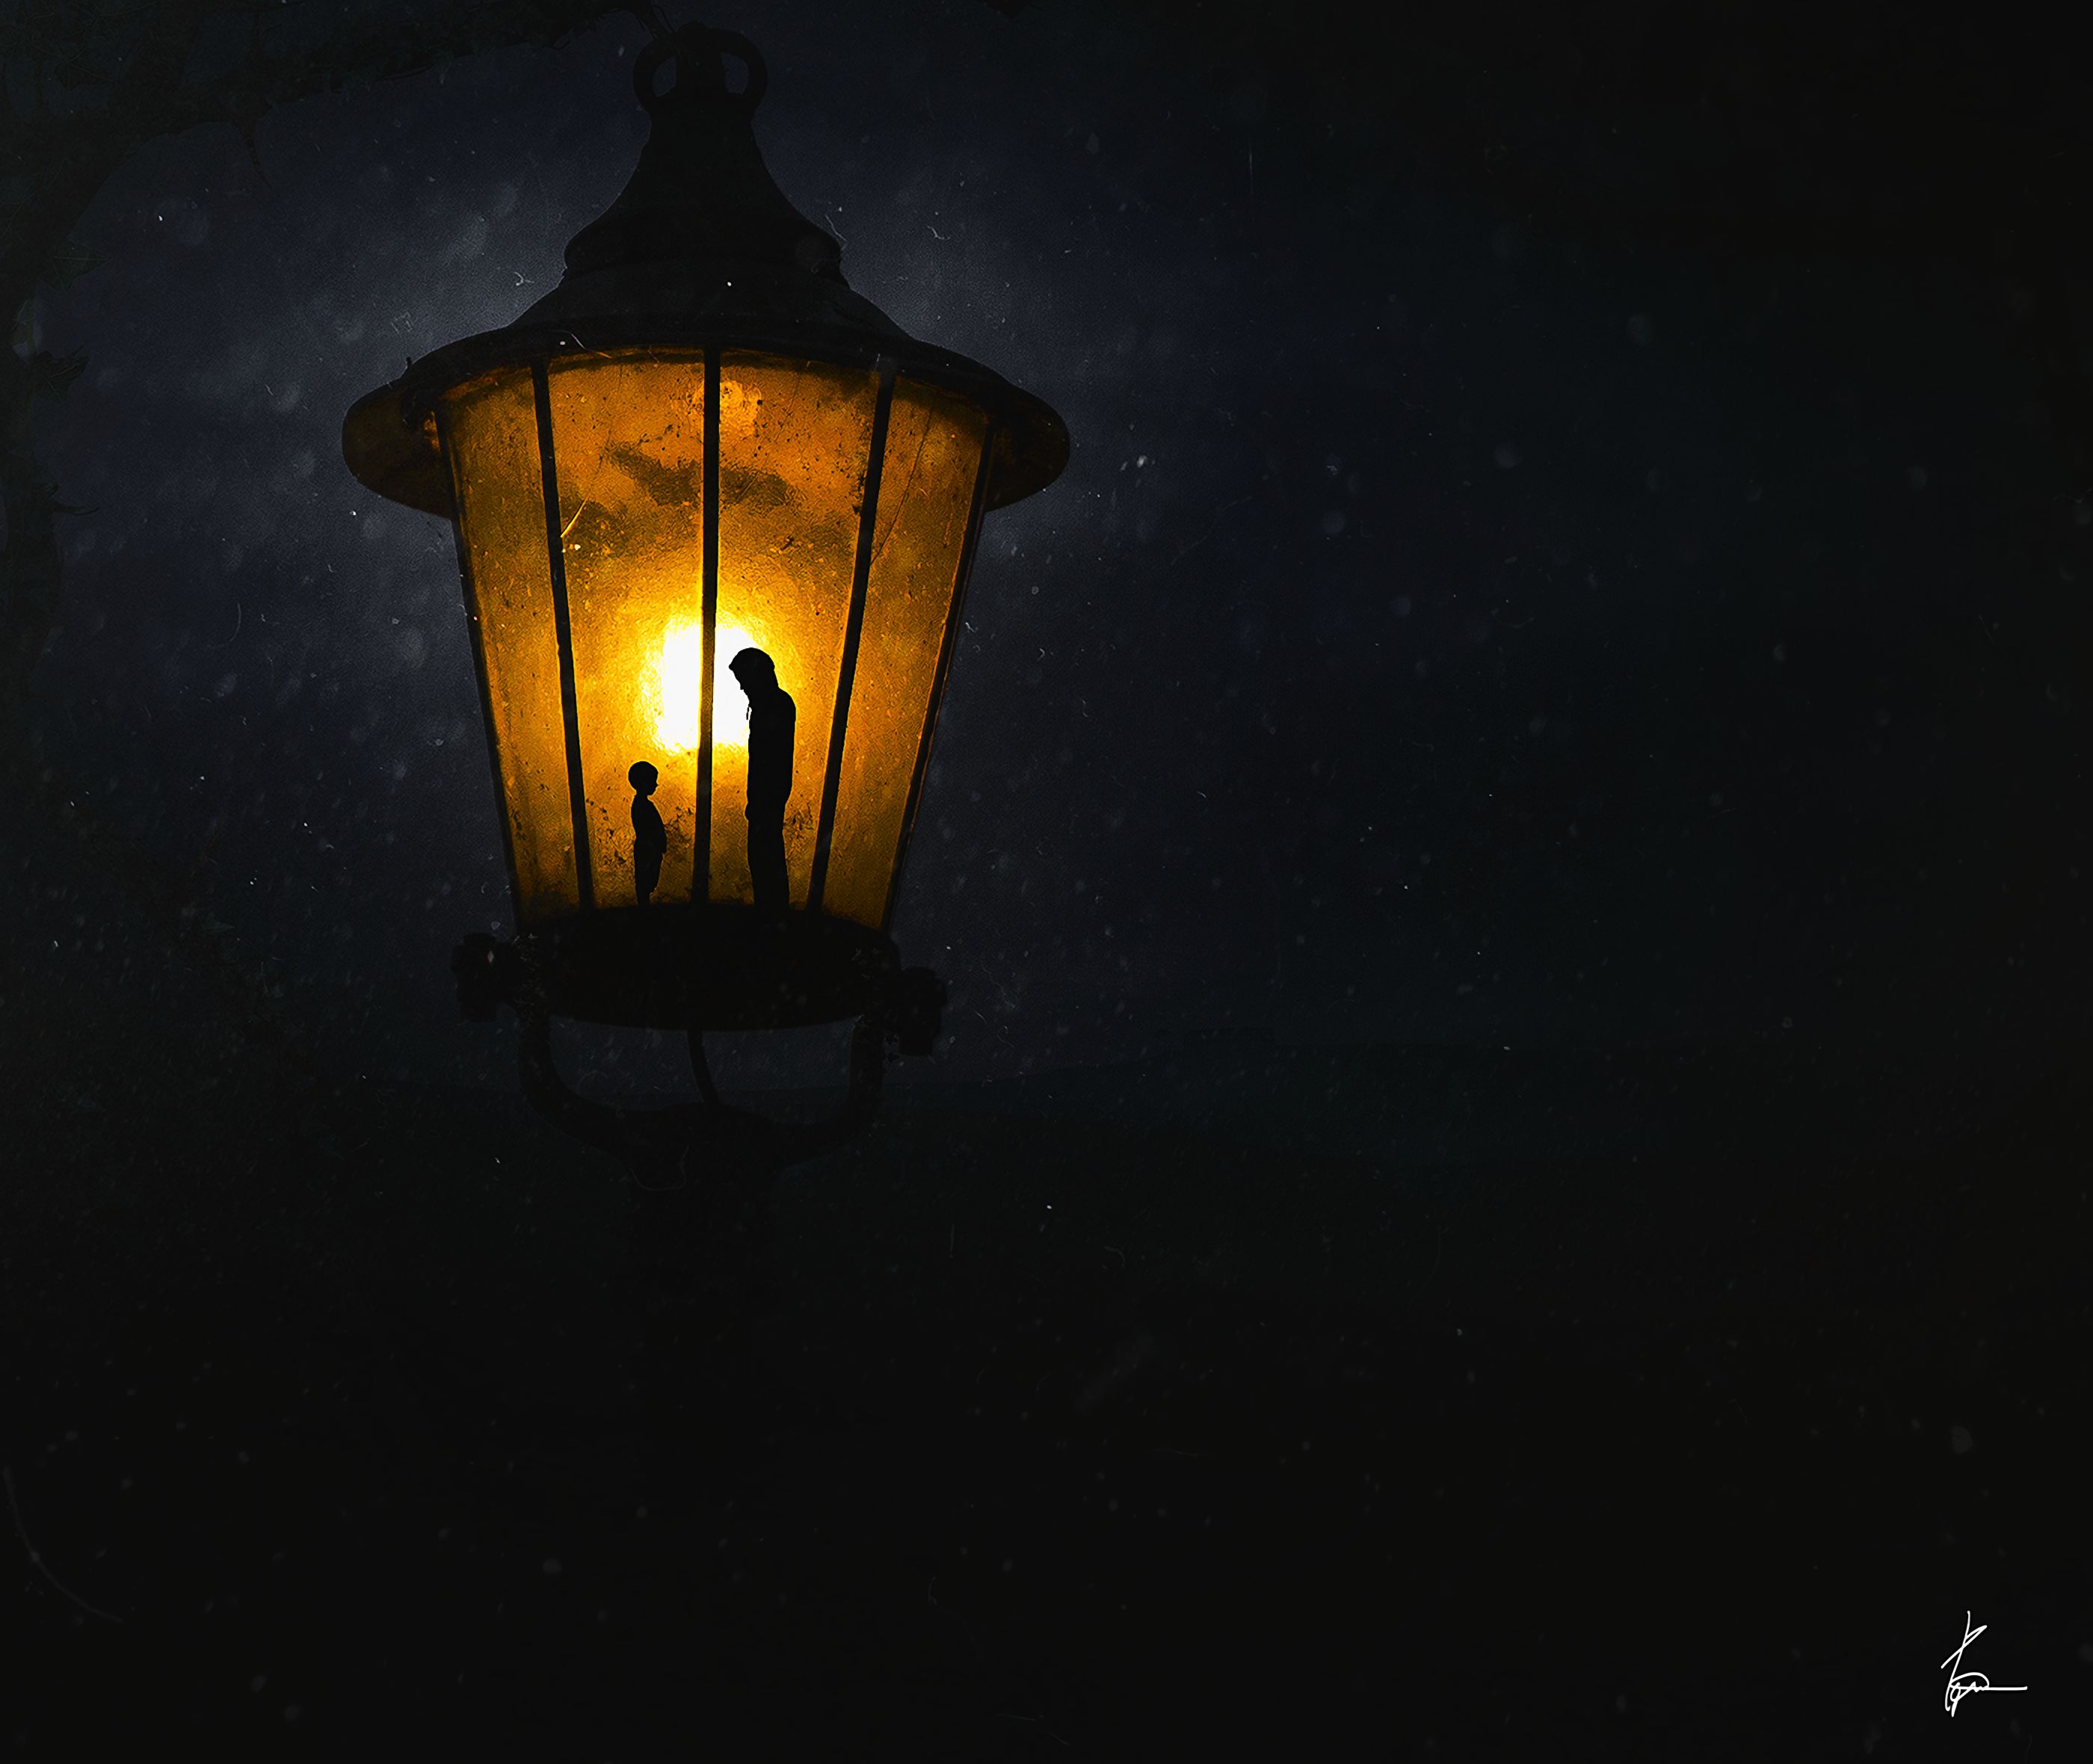 lamp, photoshop, dark, silhouettes wallpaper for mobile